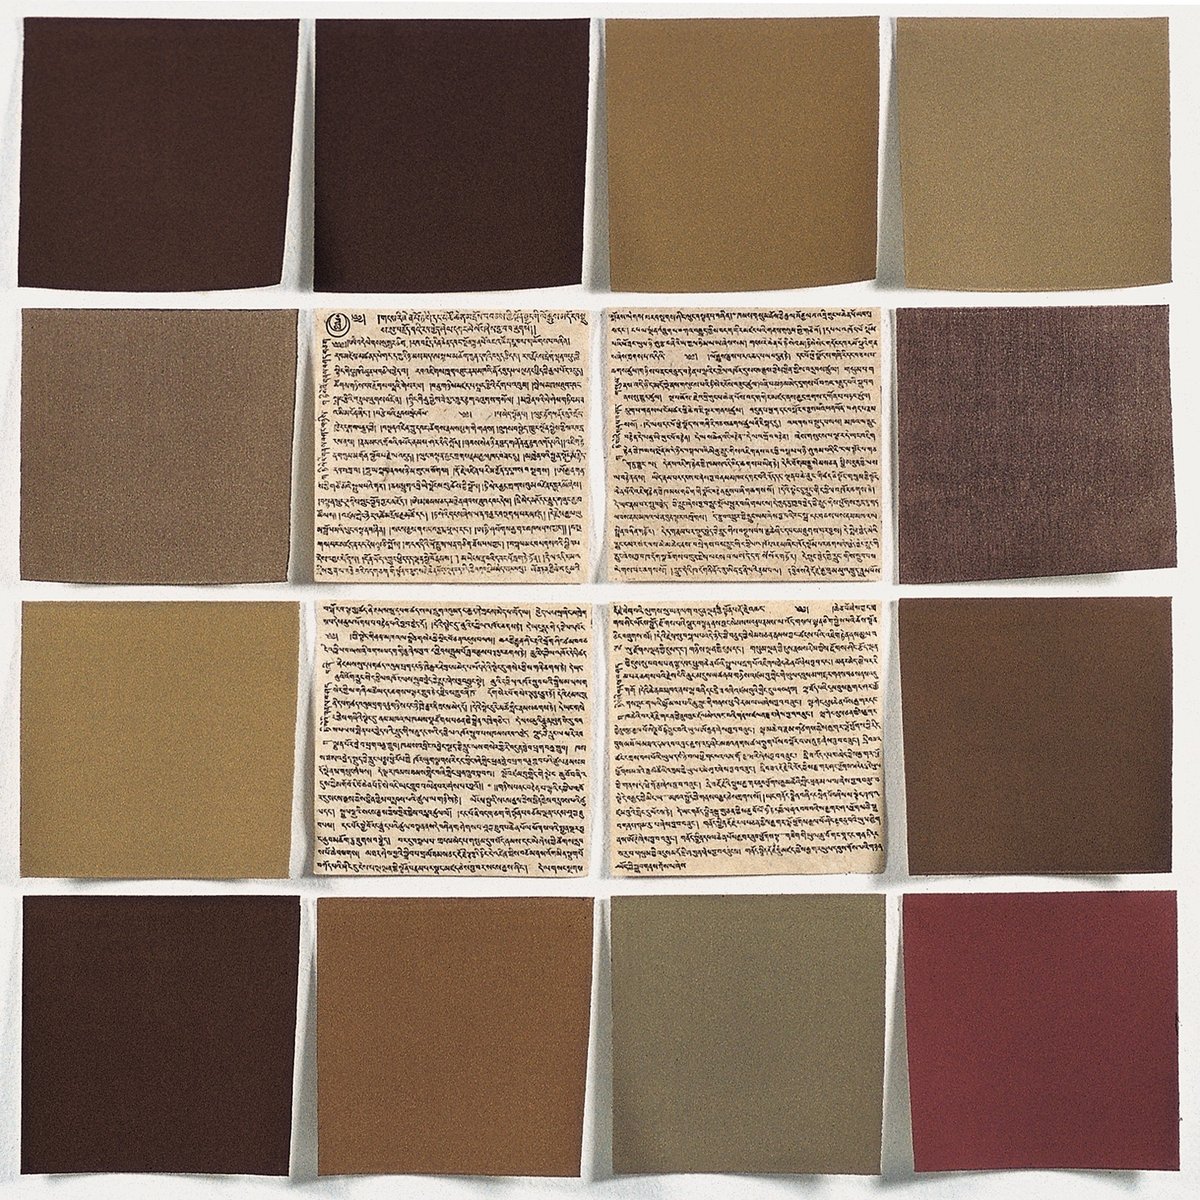 view of individual pages from ekkeland götze&#x27;s artist&#x27;s book “kailas” (1999)